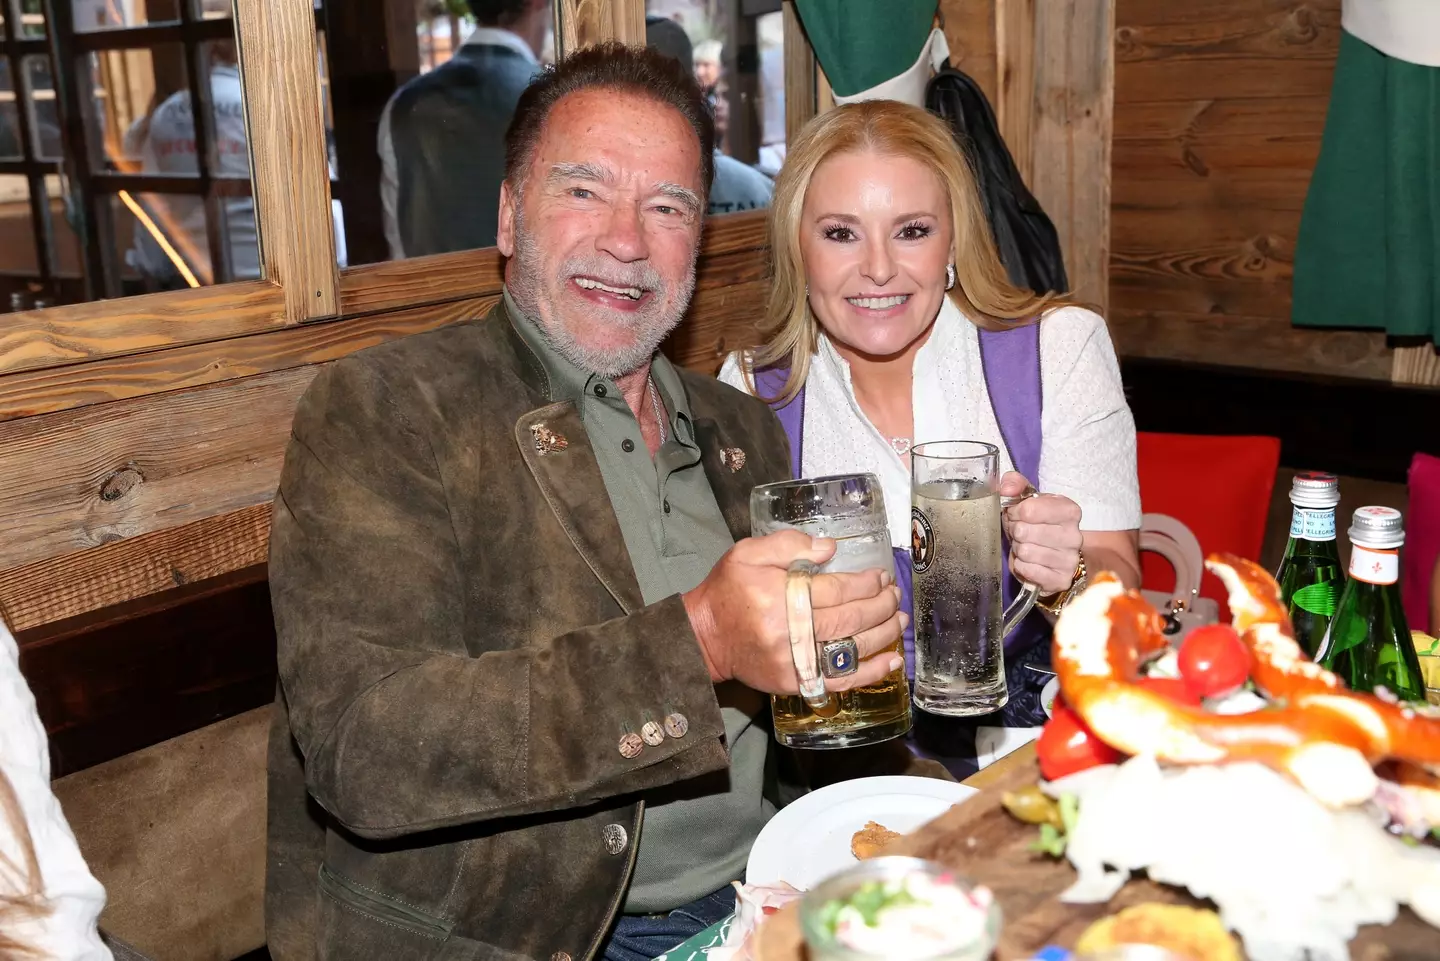 Arnold Schwarzenegger and Heather Milligan have been dating for more than a decade.